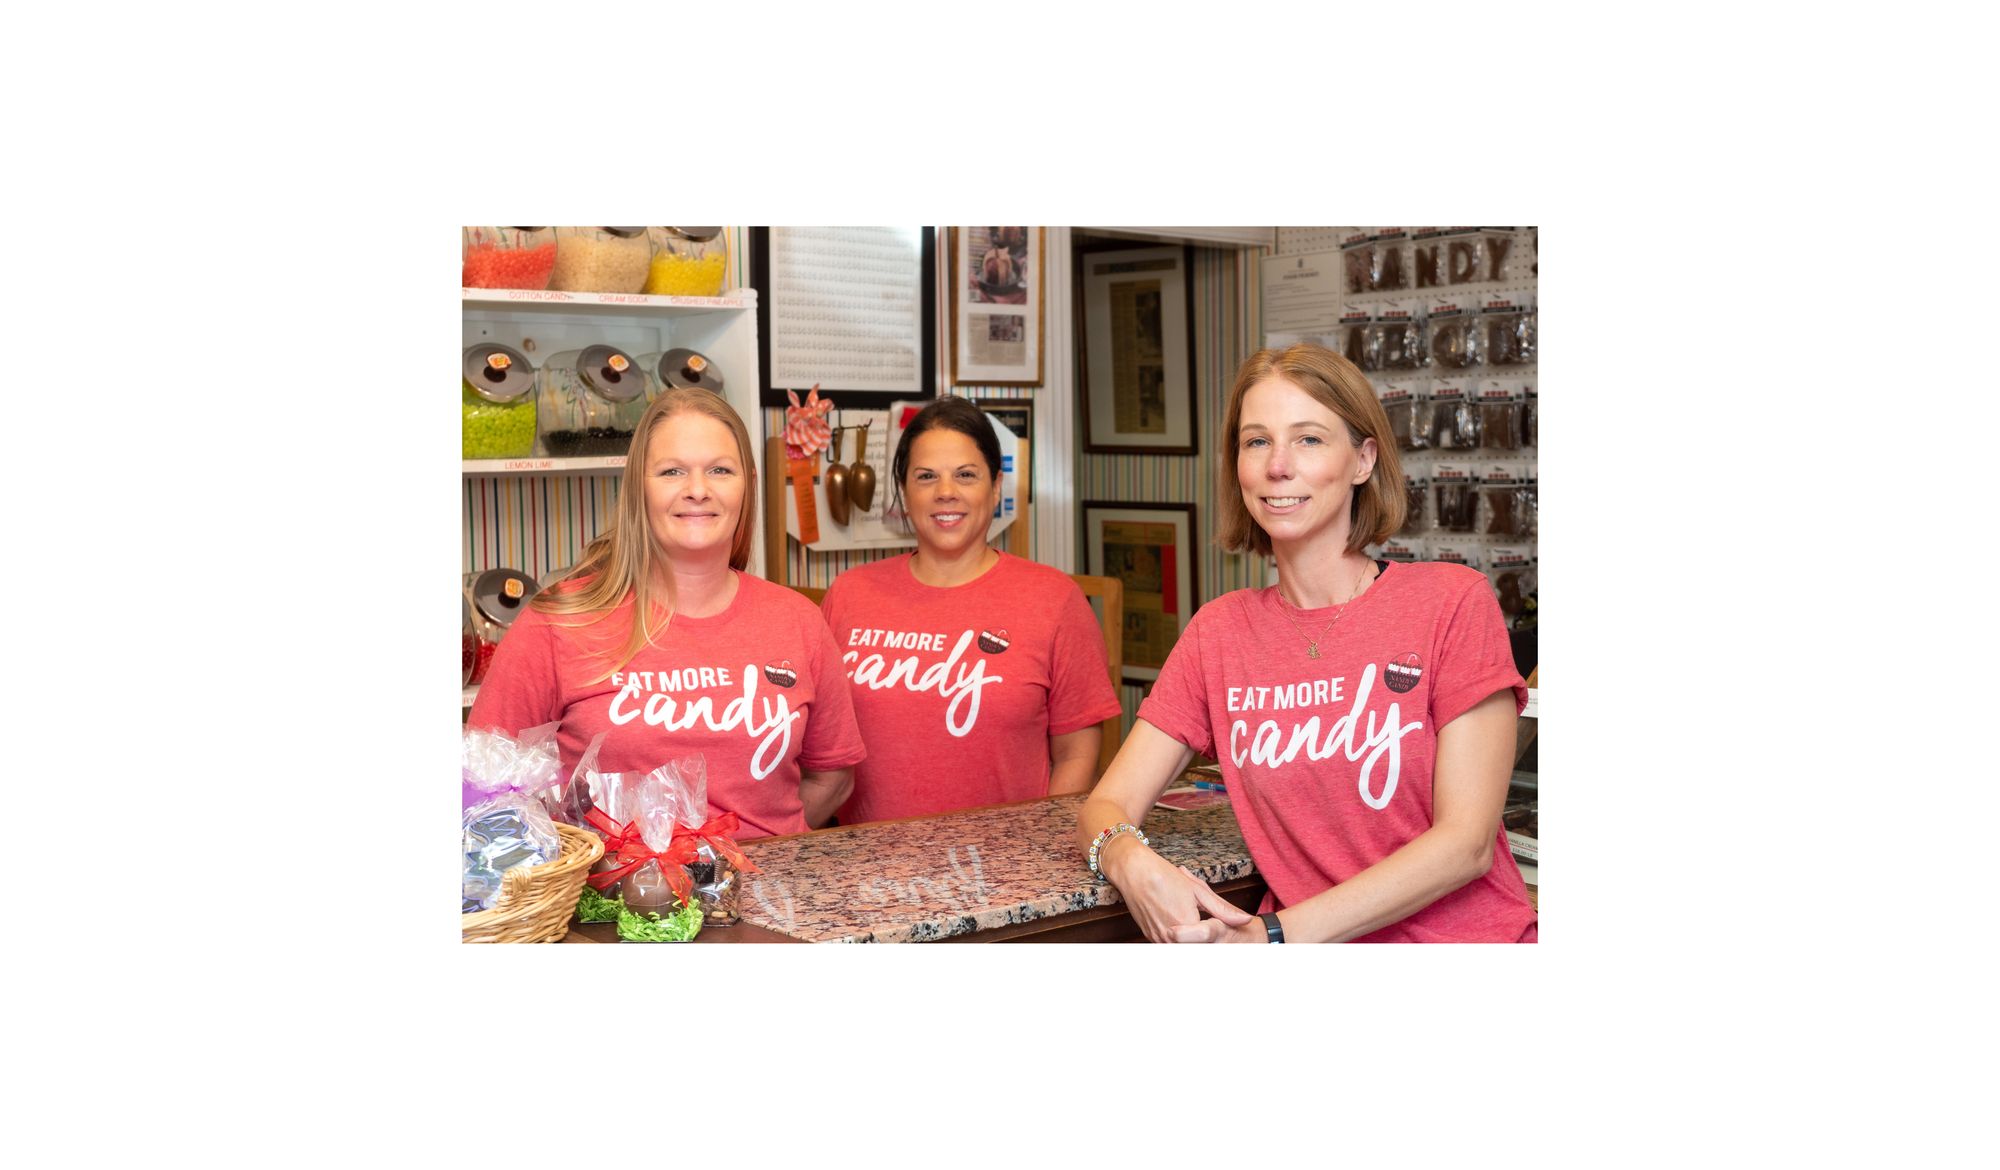 Handmade Chocolates, Confections, and More - Nandy's Candy